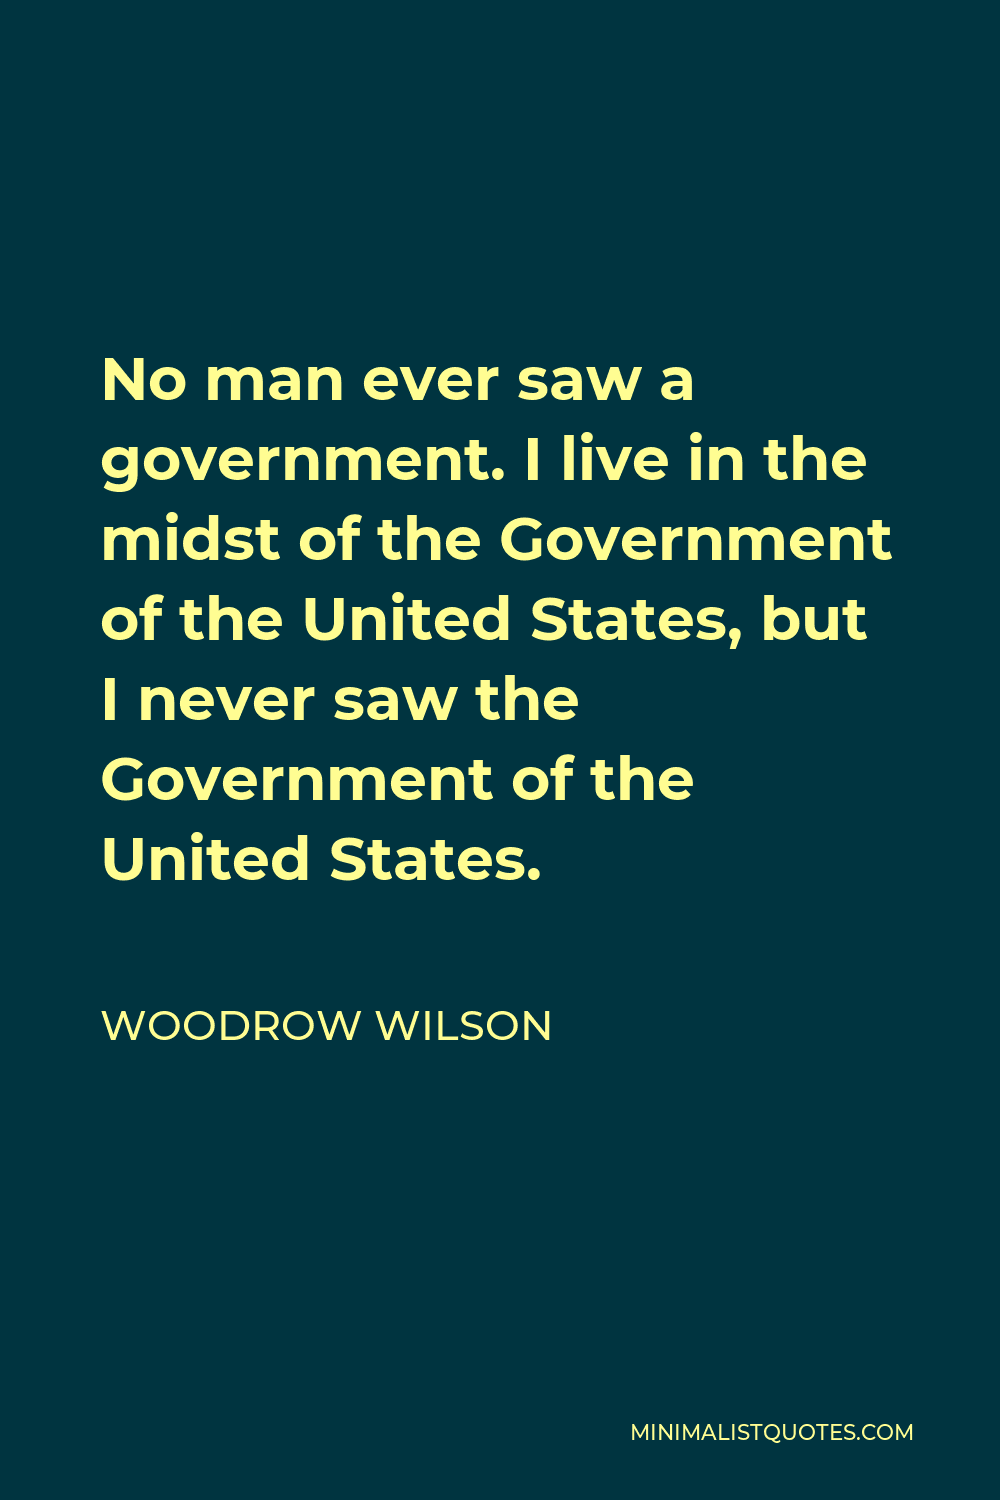 Woodrow Wilson Quote - No man ever saw a government. I live in the midst of the Government of the United States, but I never saw the Government of the United States.